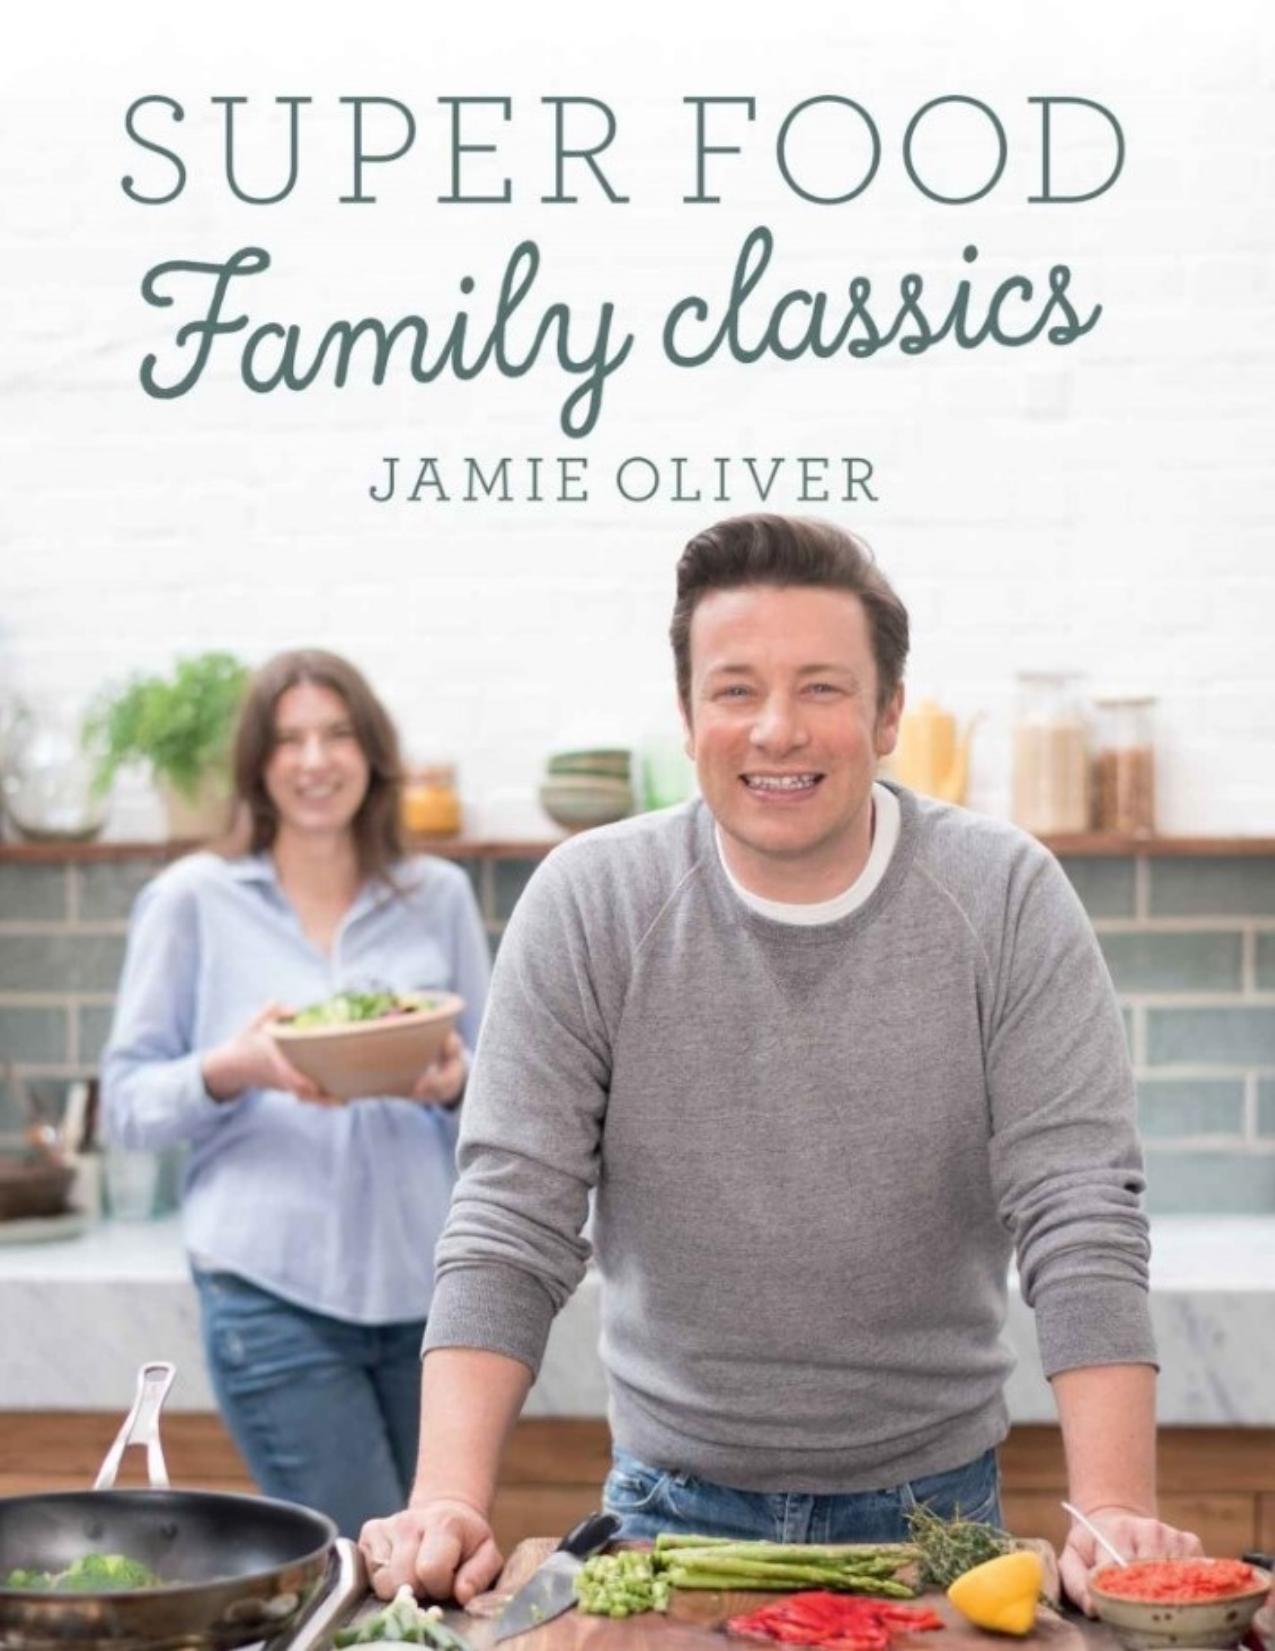 Super Food Family Classics by Jamie Oliver